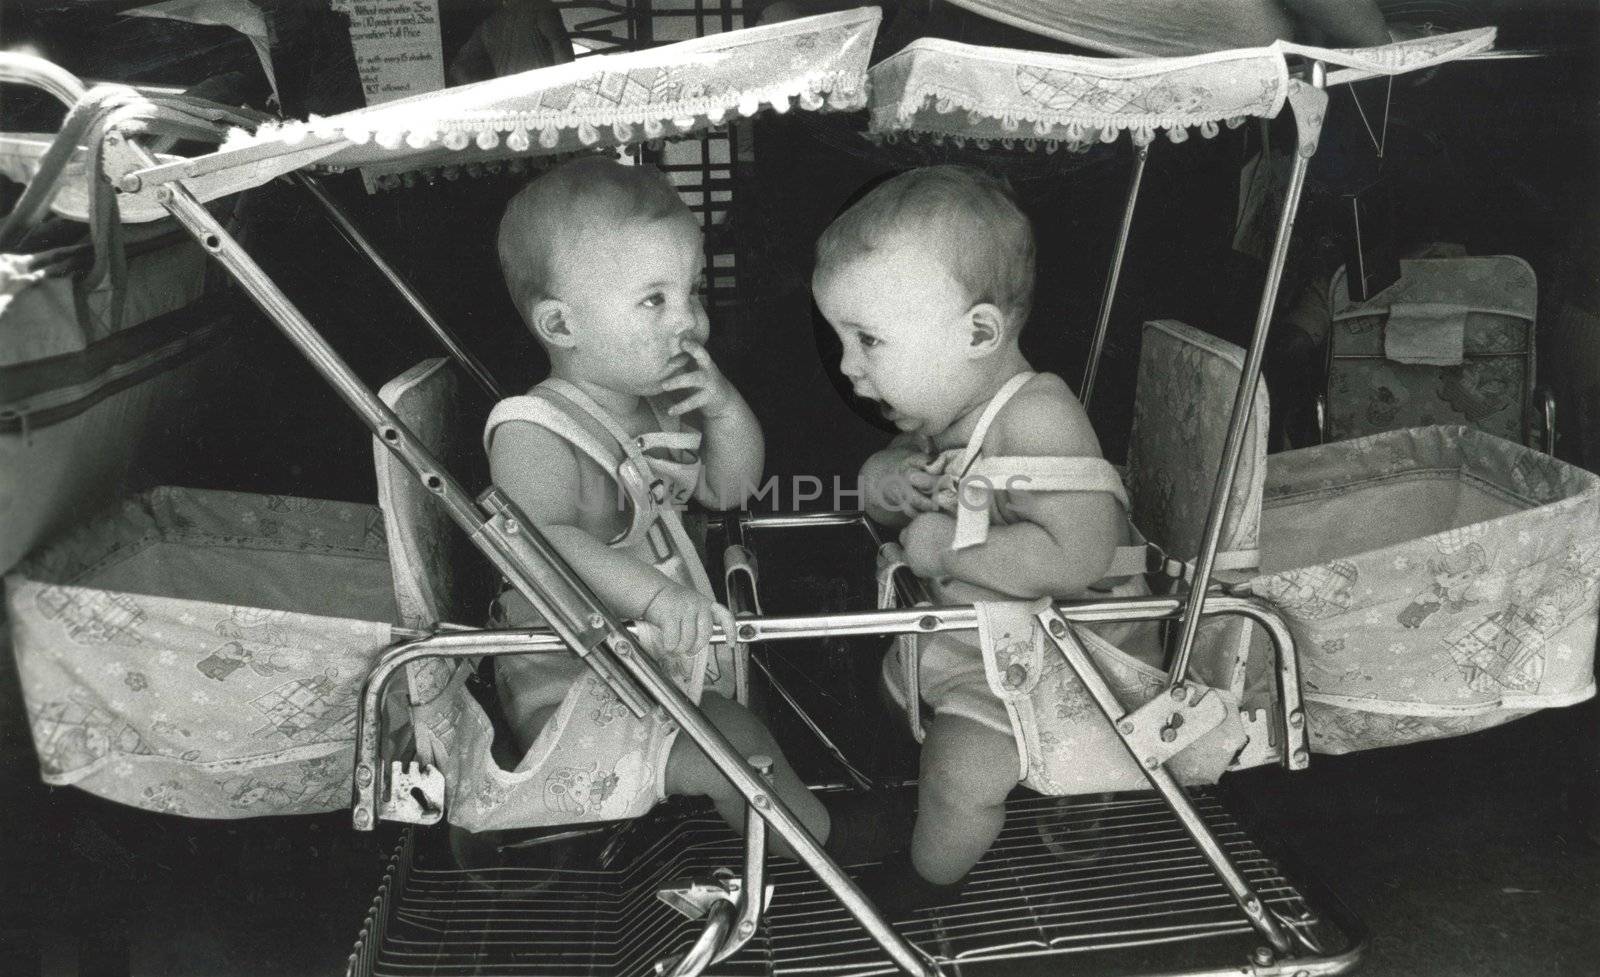 Twins at a twin festival in Little Rock, Arkansas in 1975 by athomedad